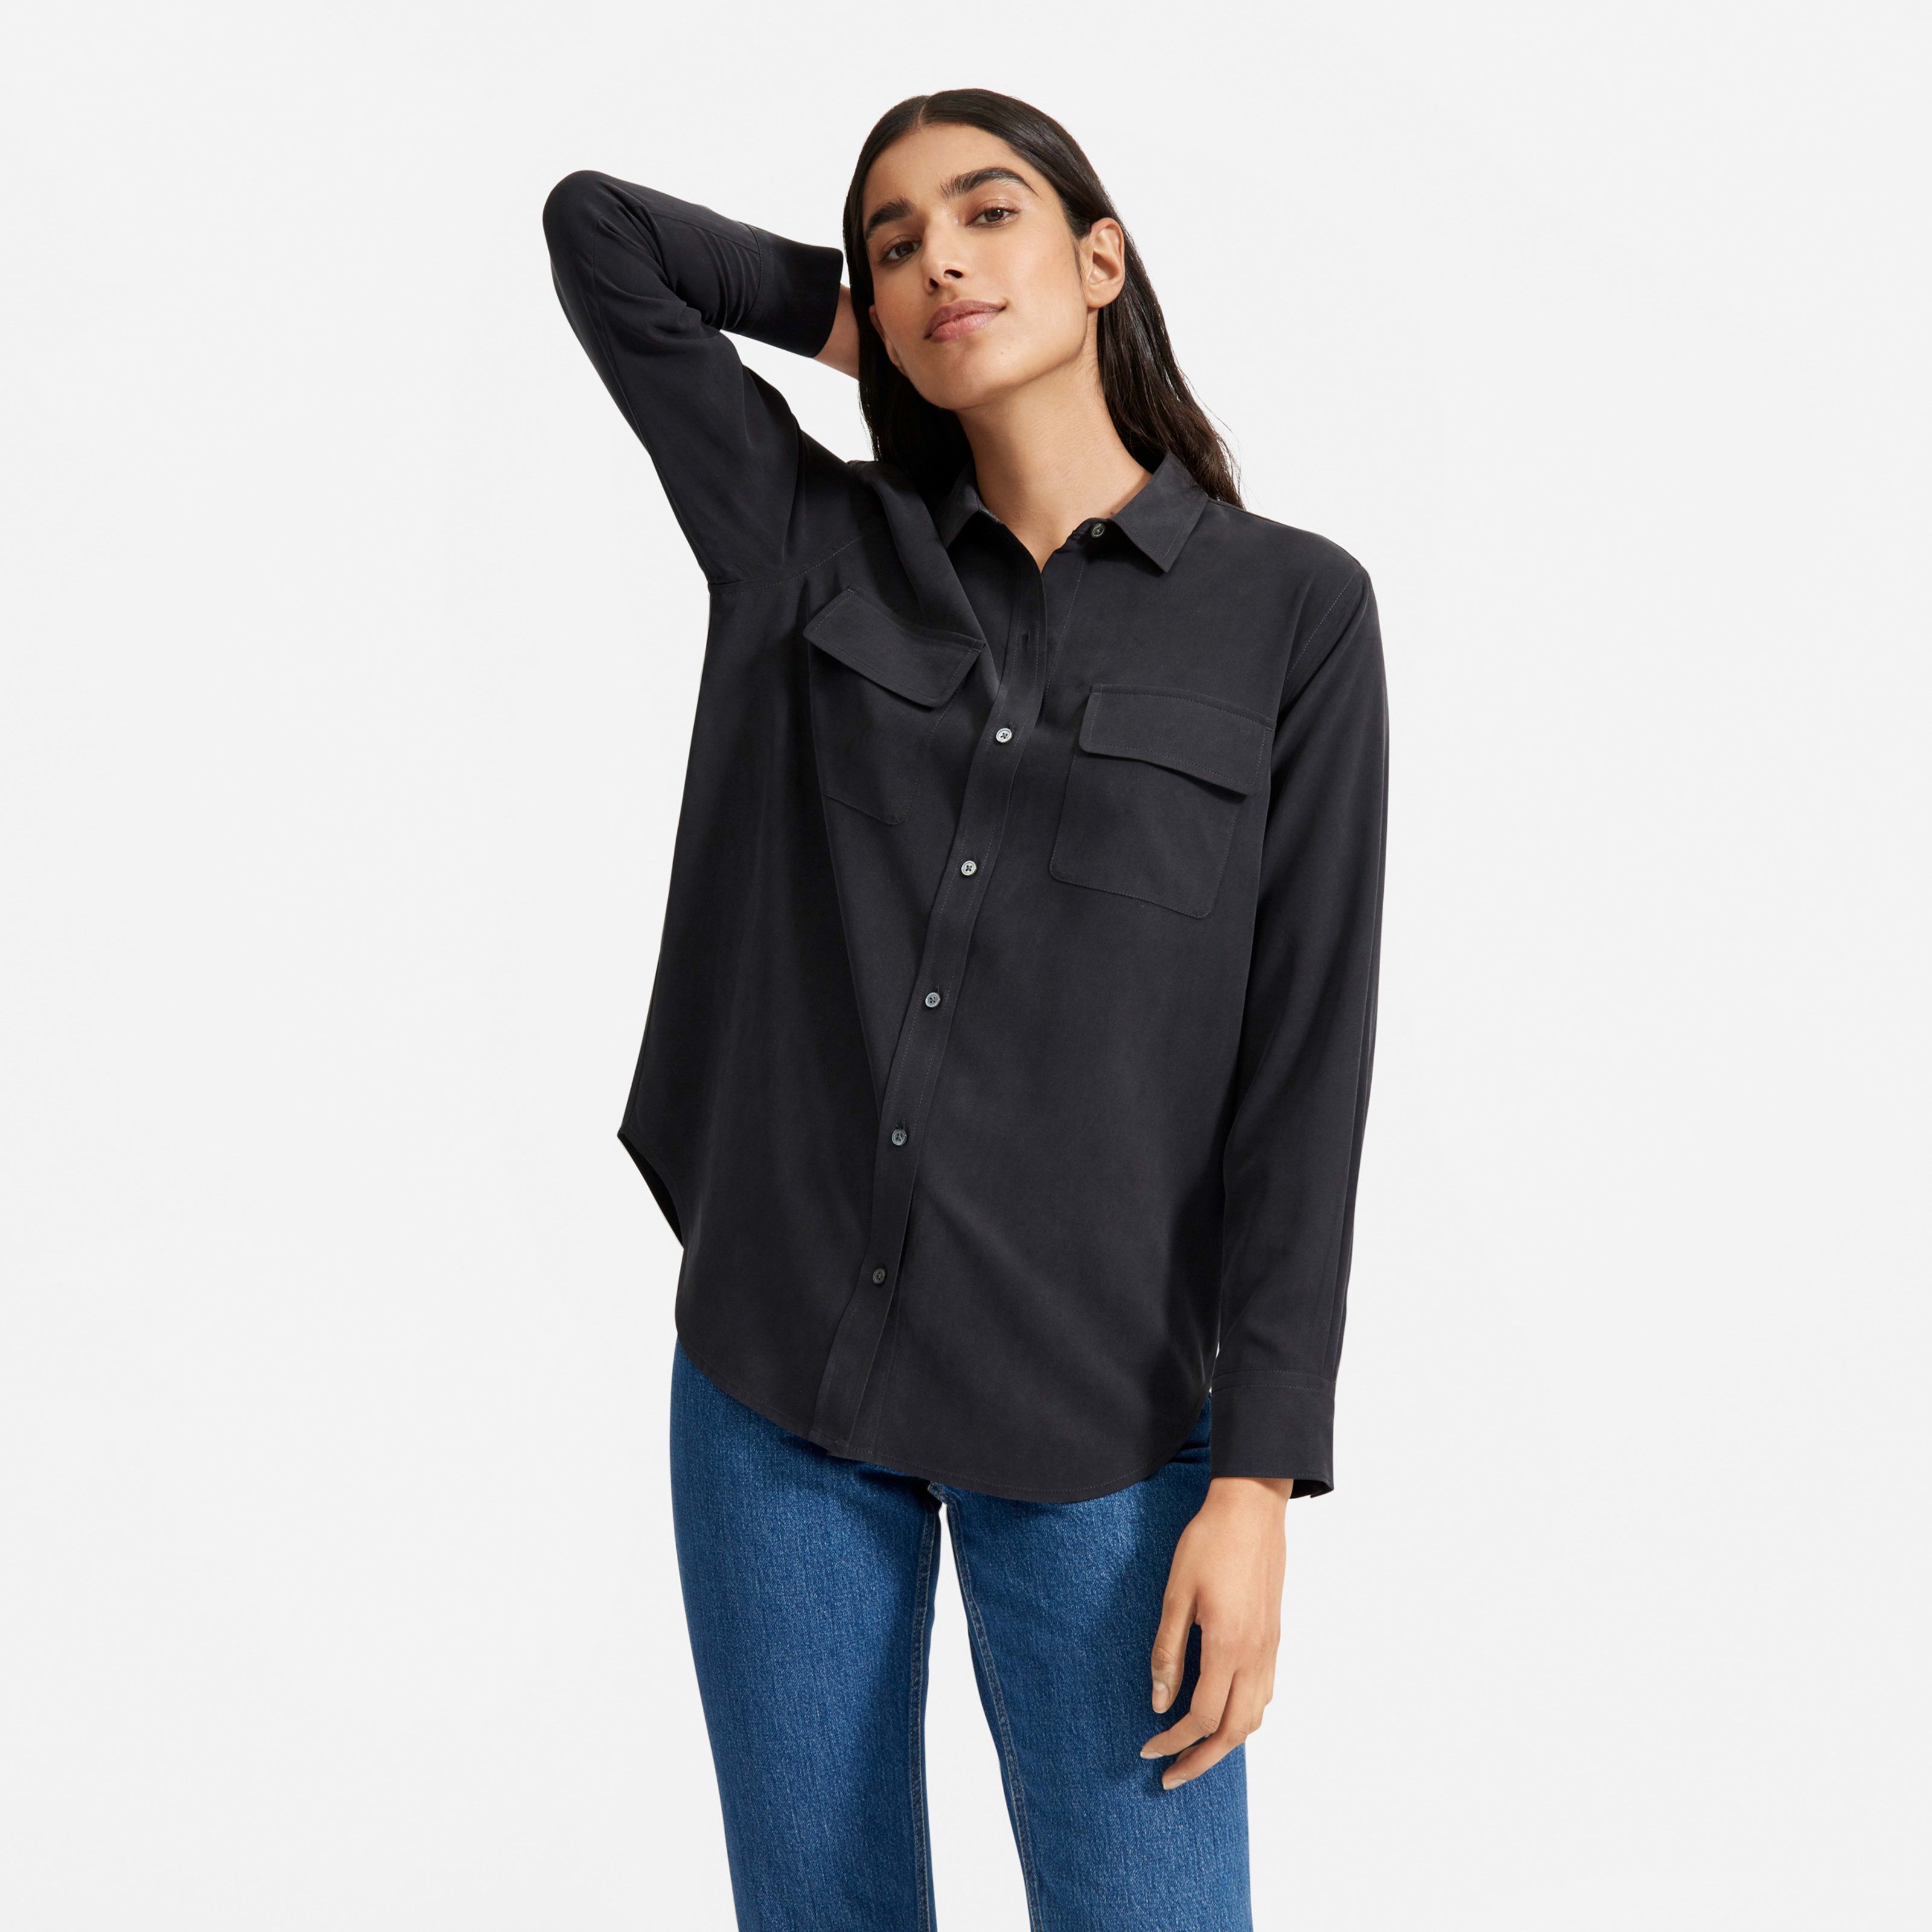 Women's Washable Silk Relaxed Shirt by Everlane in Black, Size 16 | Everlane